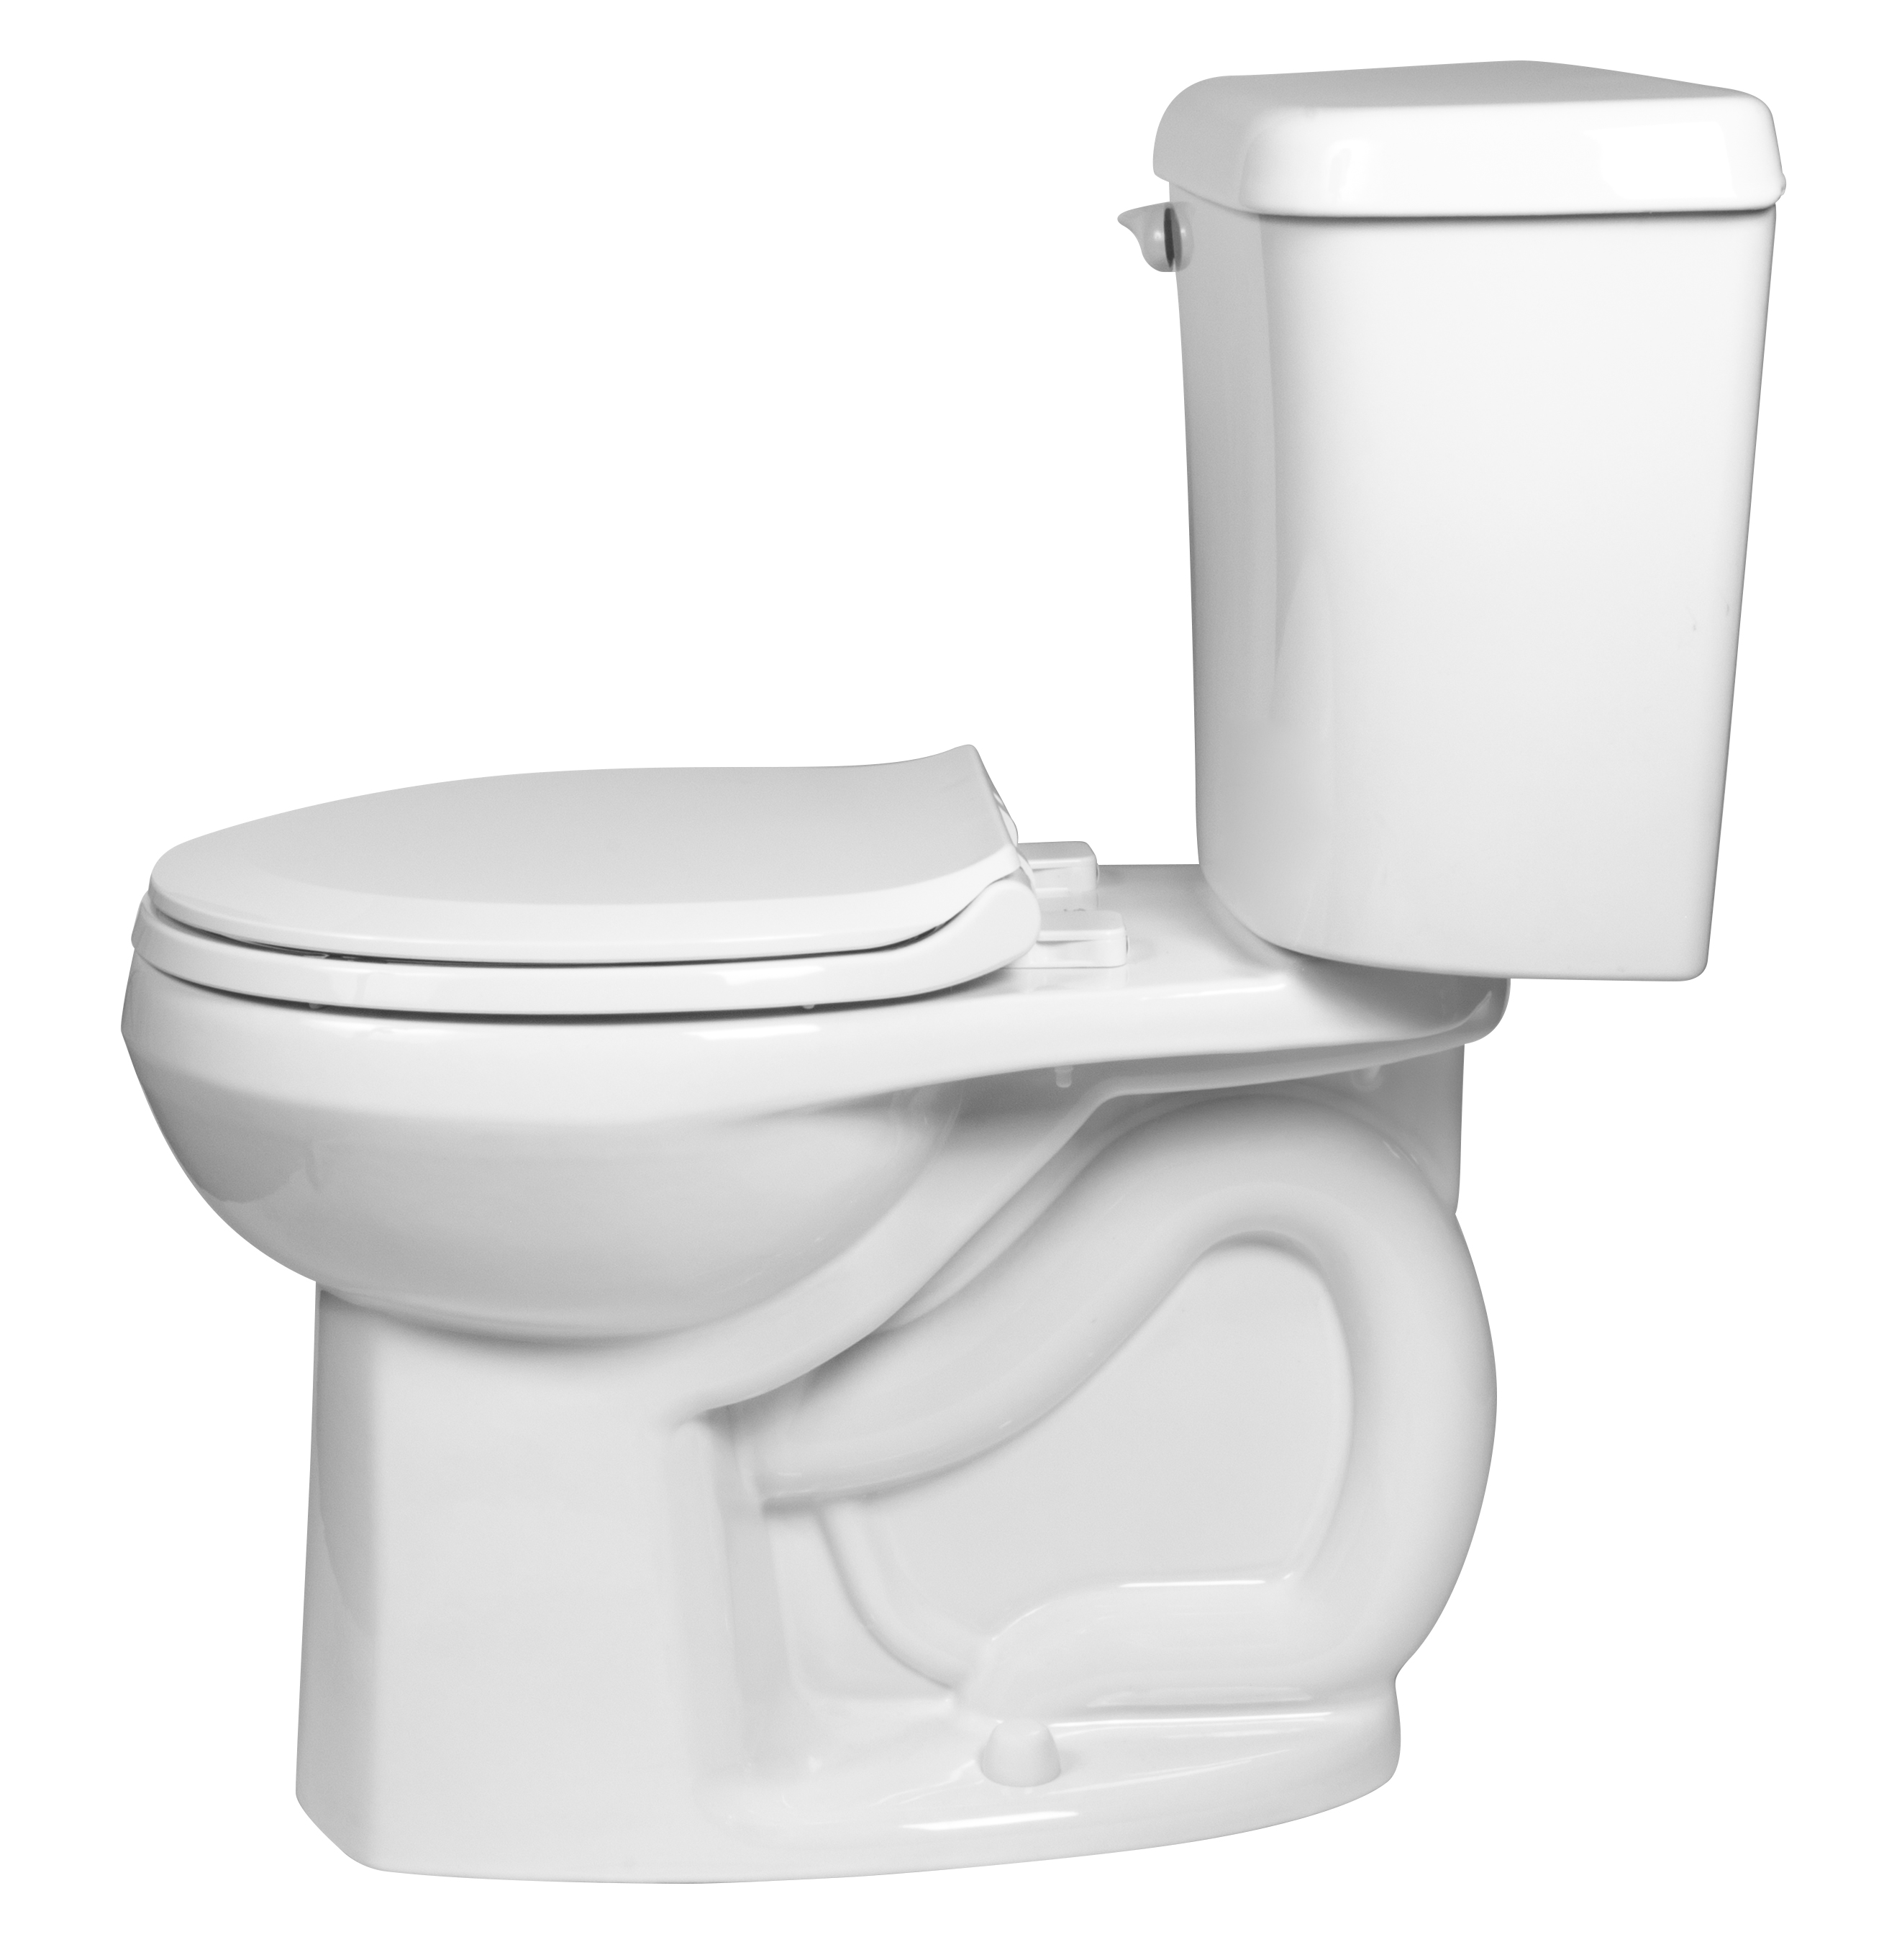 Sonoma Two-Piece 1.28 gpf/4.8 Lpf Chair Height Round Front Complete Toilet With Seat and Lined Tank